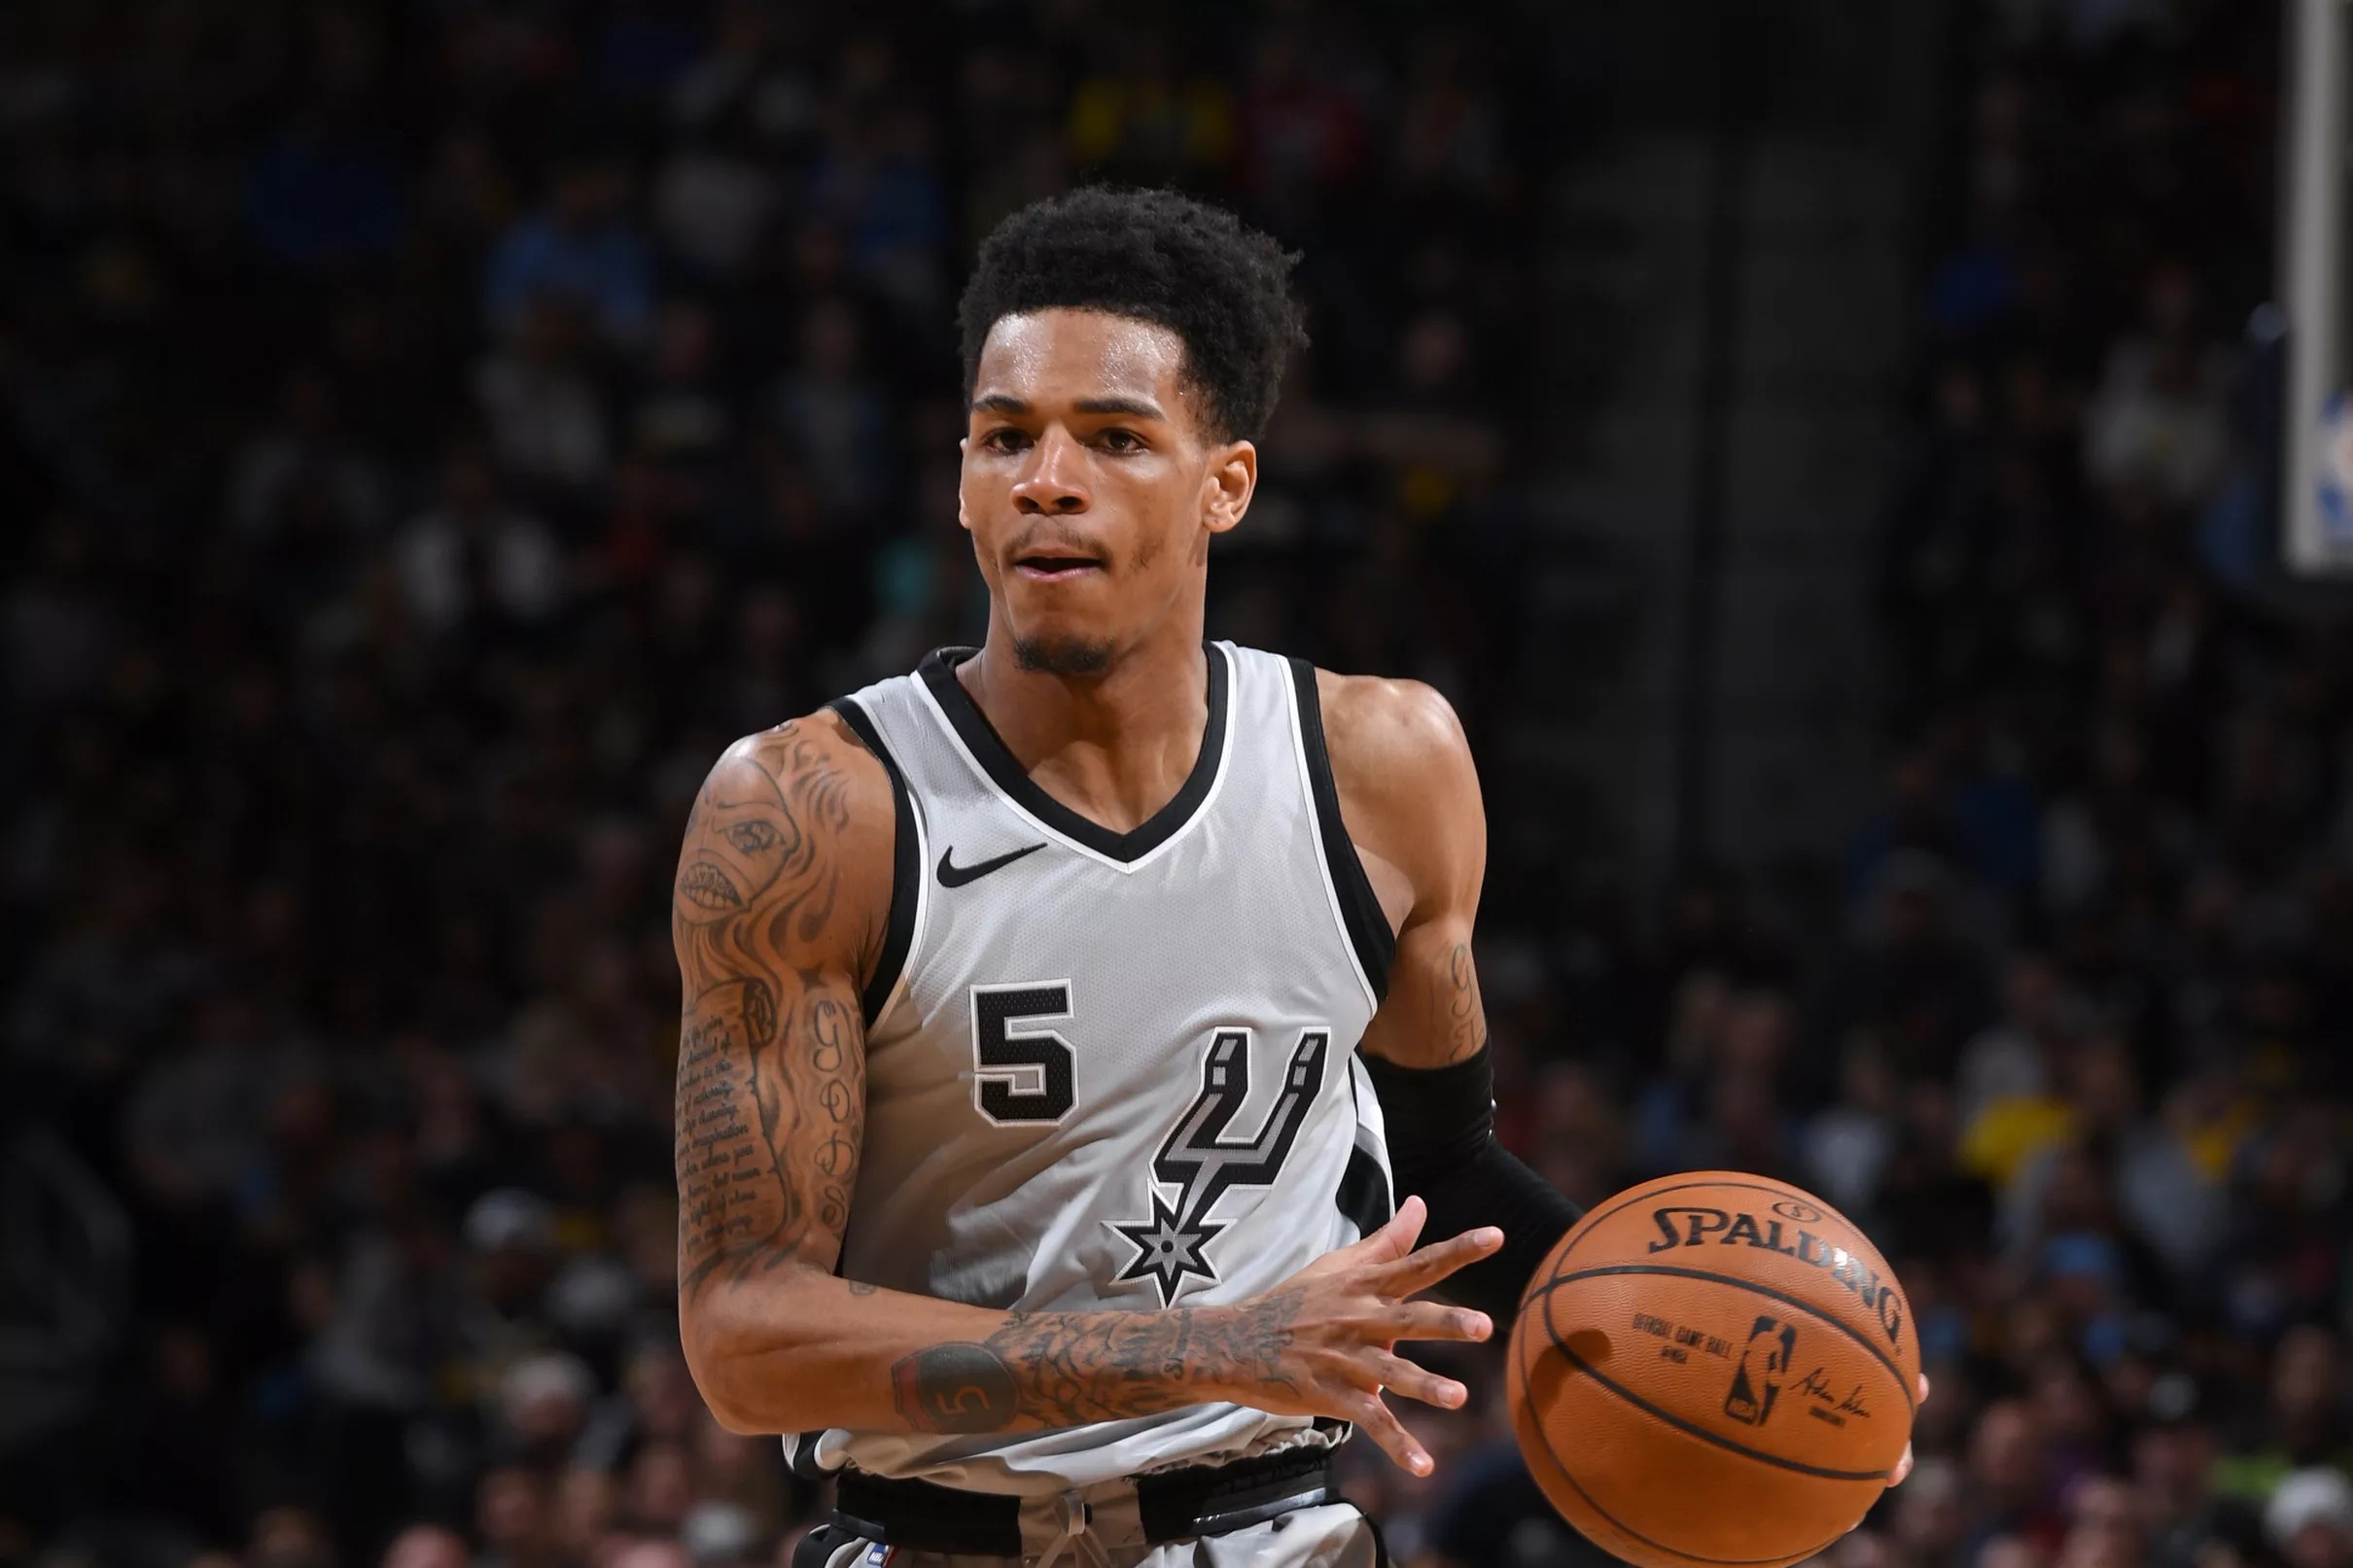 Dejounte Murray continues to build his reputation.